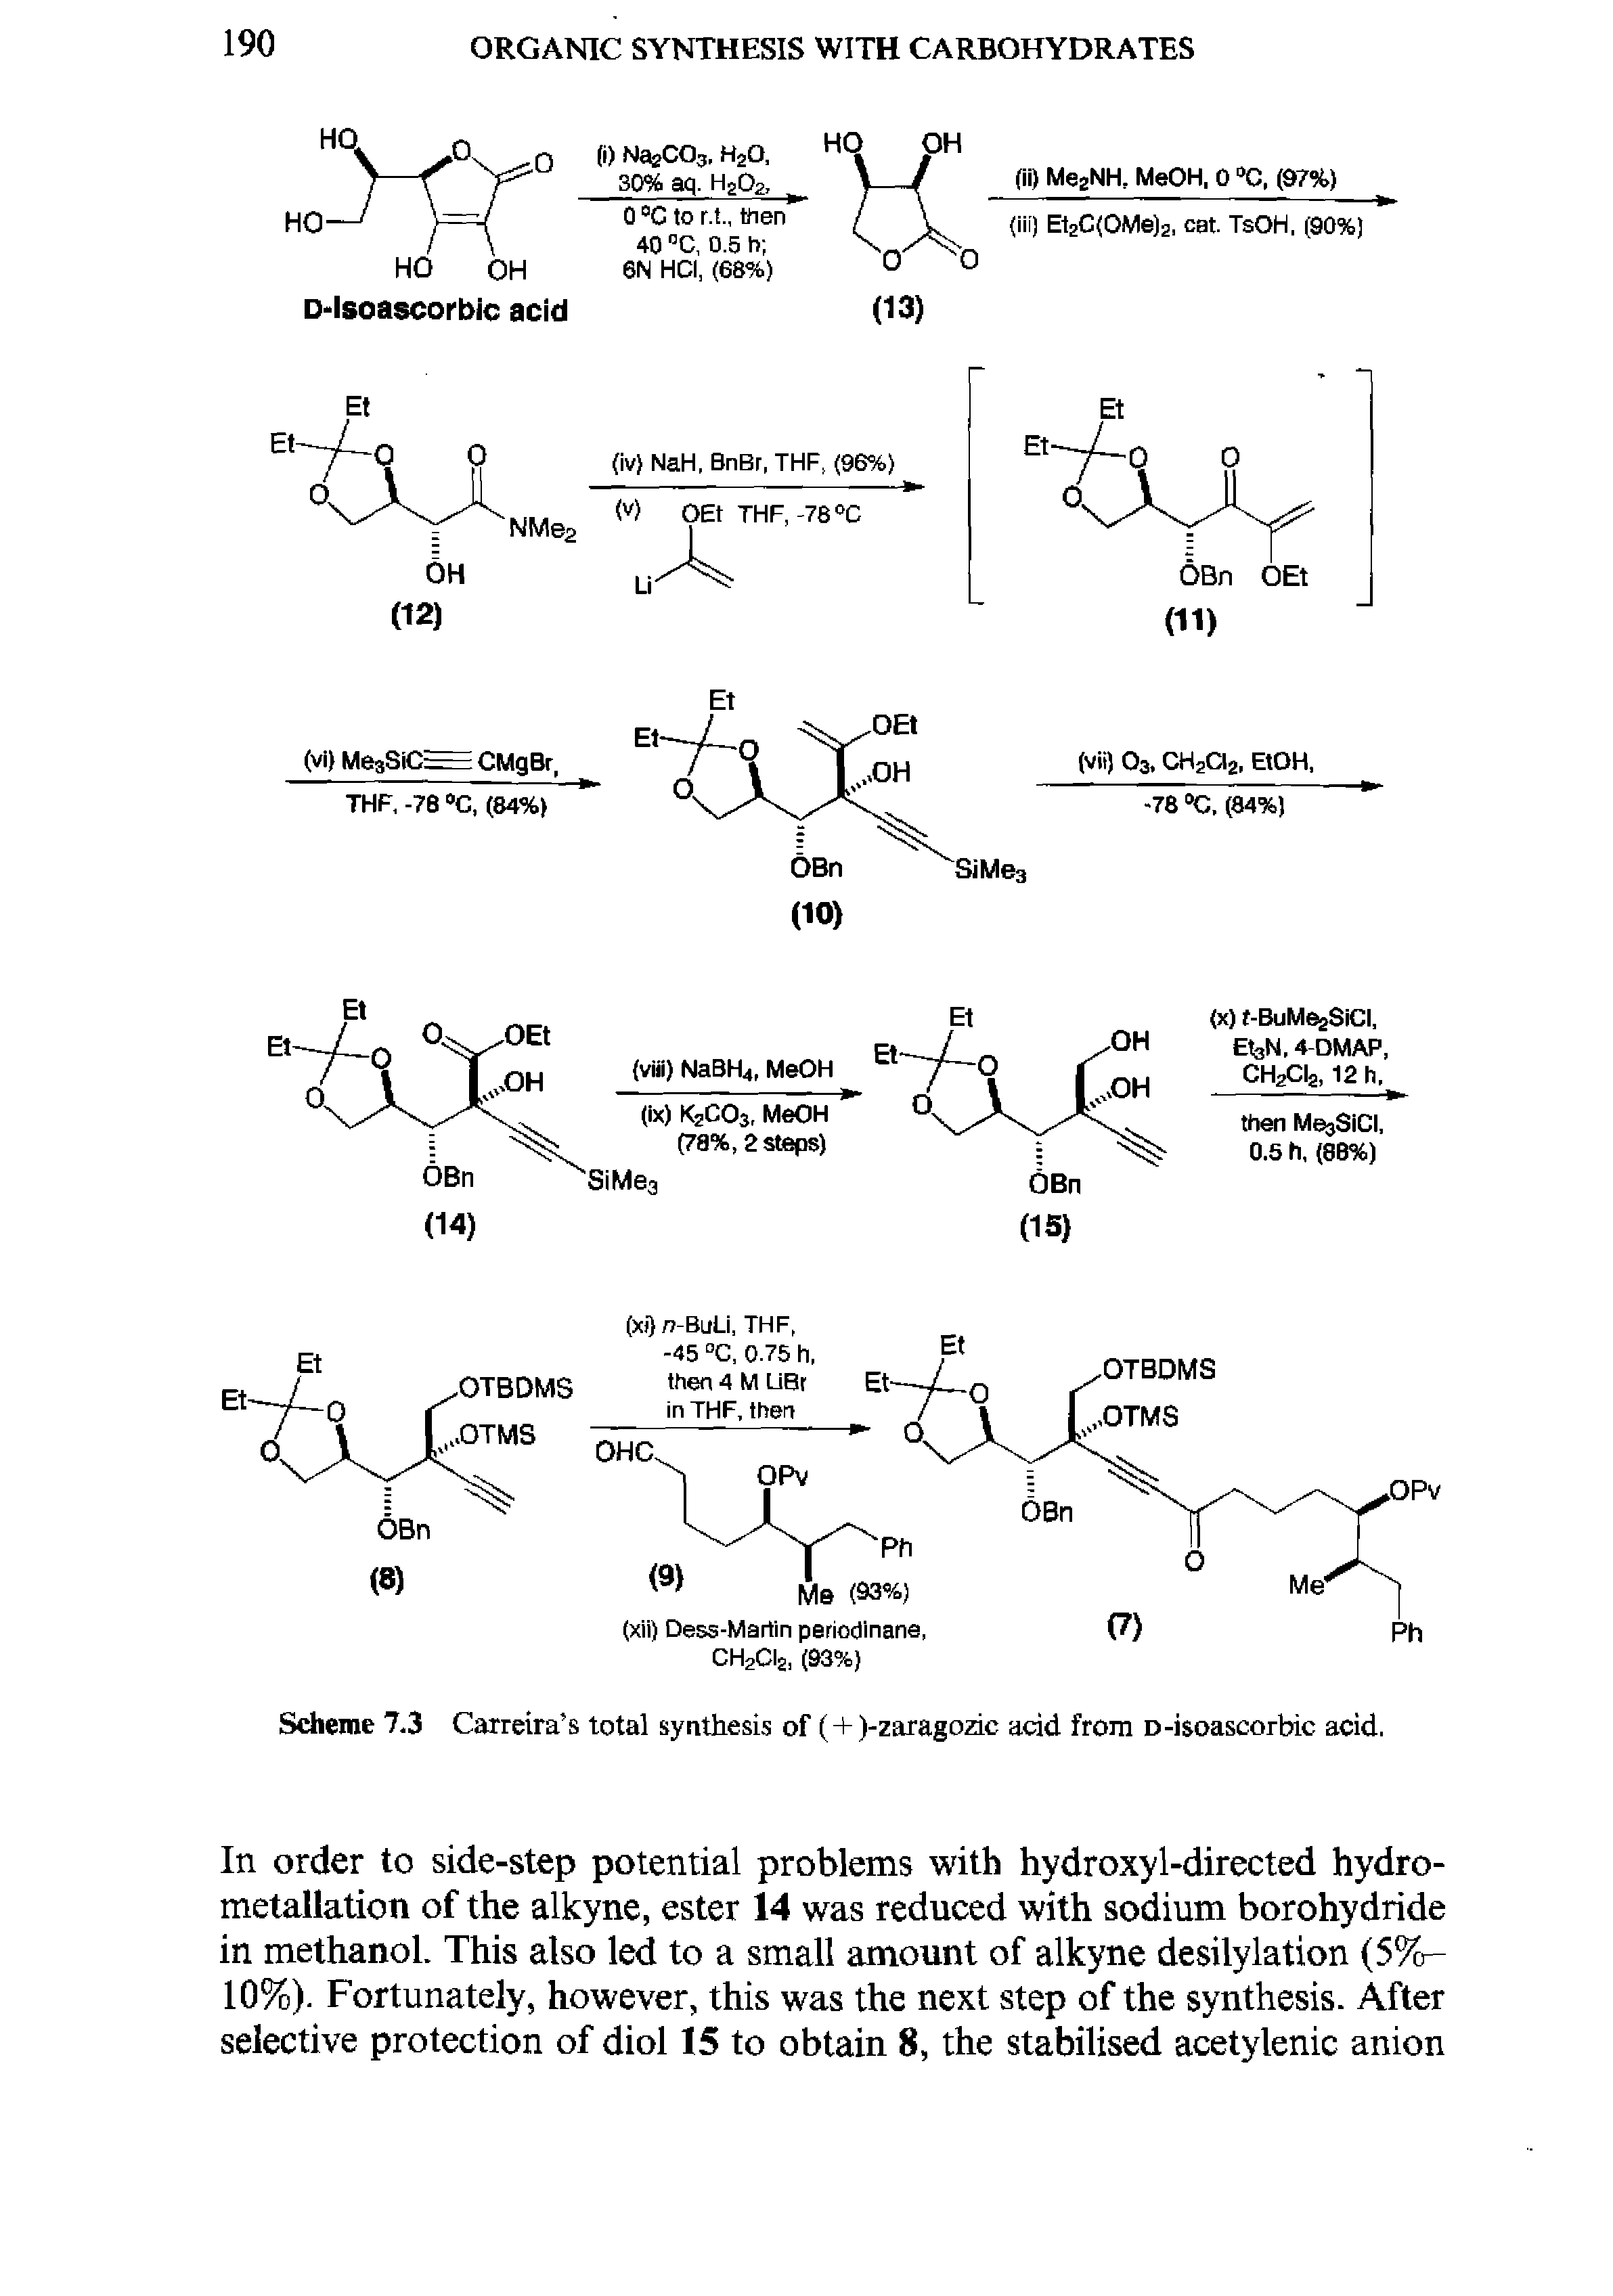 Scheme 7.3 Carreira s total synthesis of ( + )-zaragozic add from D-isoascorbic acid.